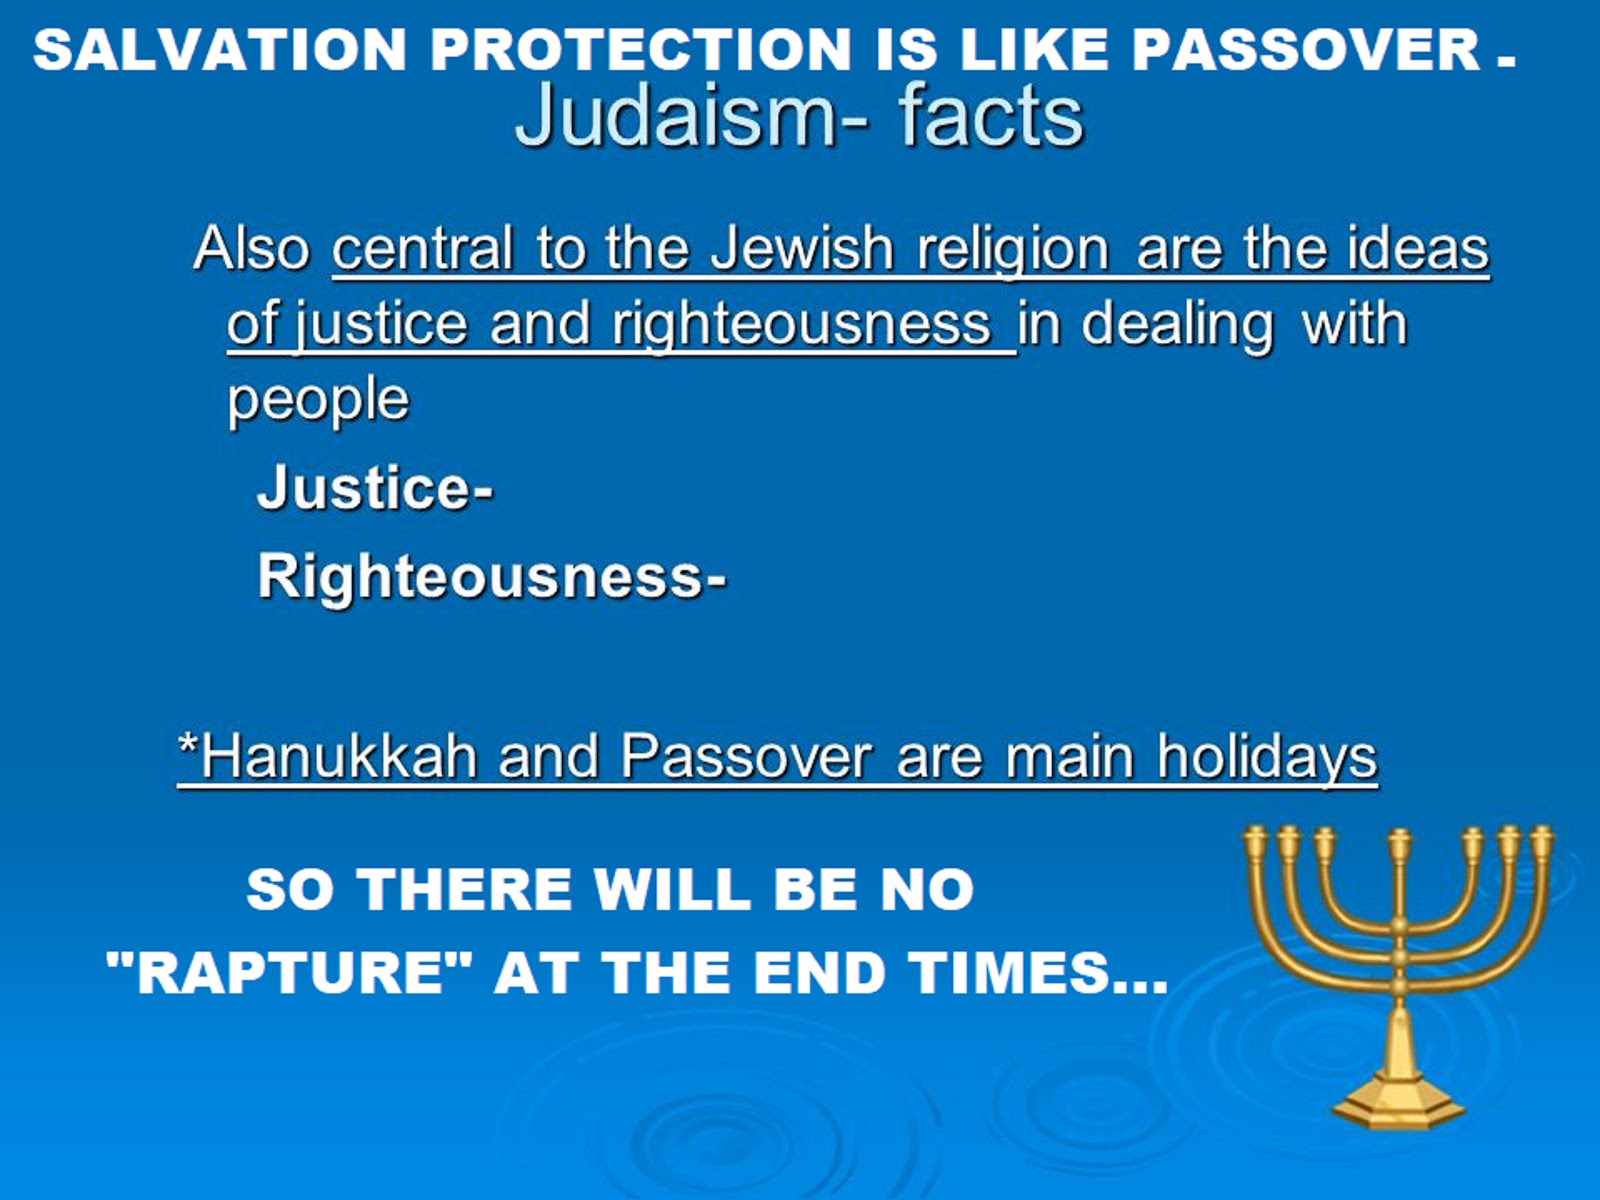 SALVATION PROTECTION WILL BE LIKE PASSOVER